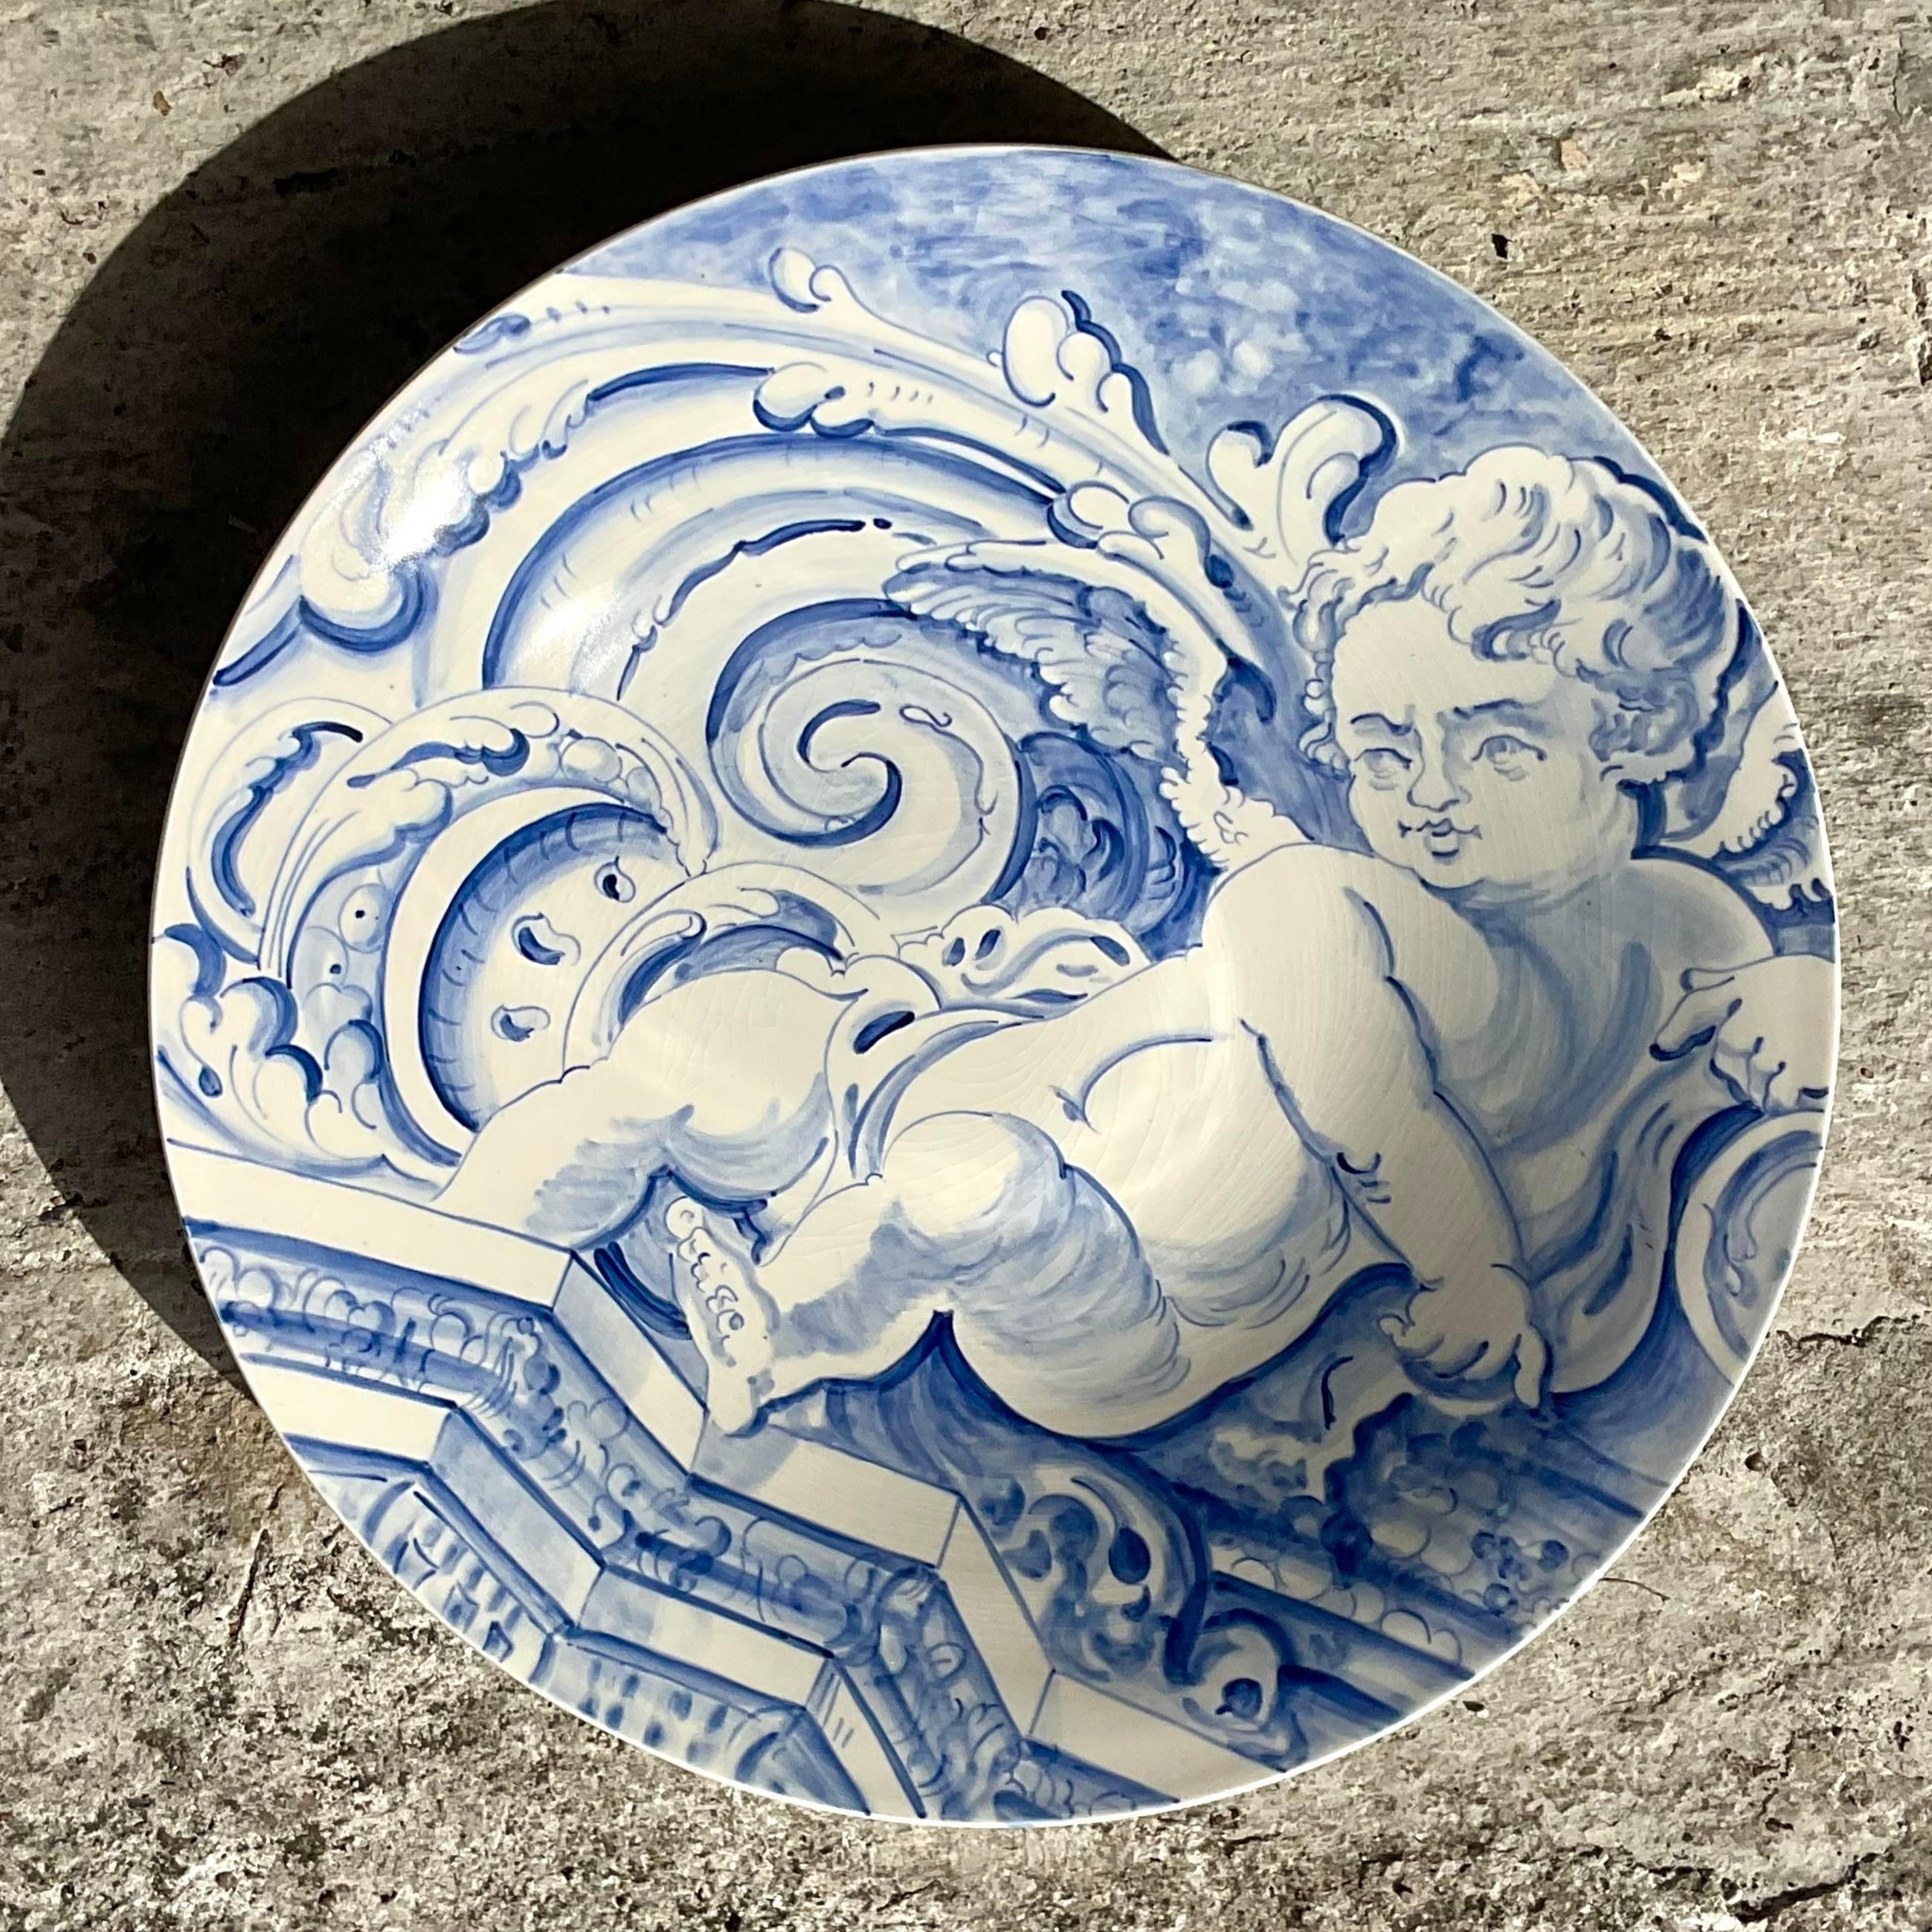 American Vintage Regency Monumental Signed Robert Walters Blue and White Cherub Plate For Sale